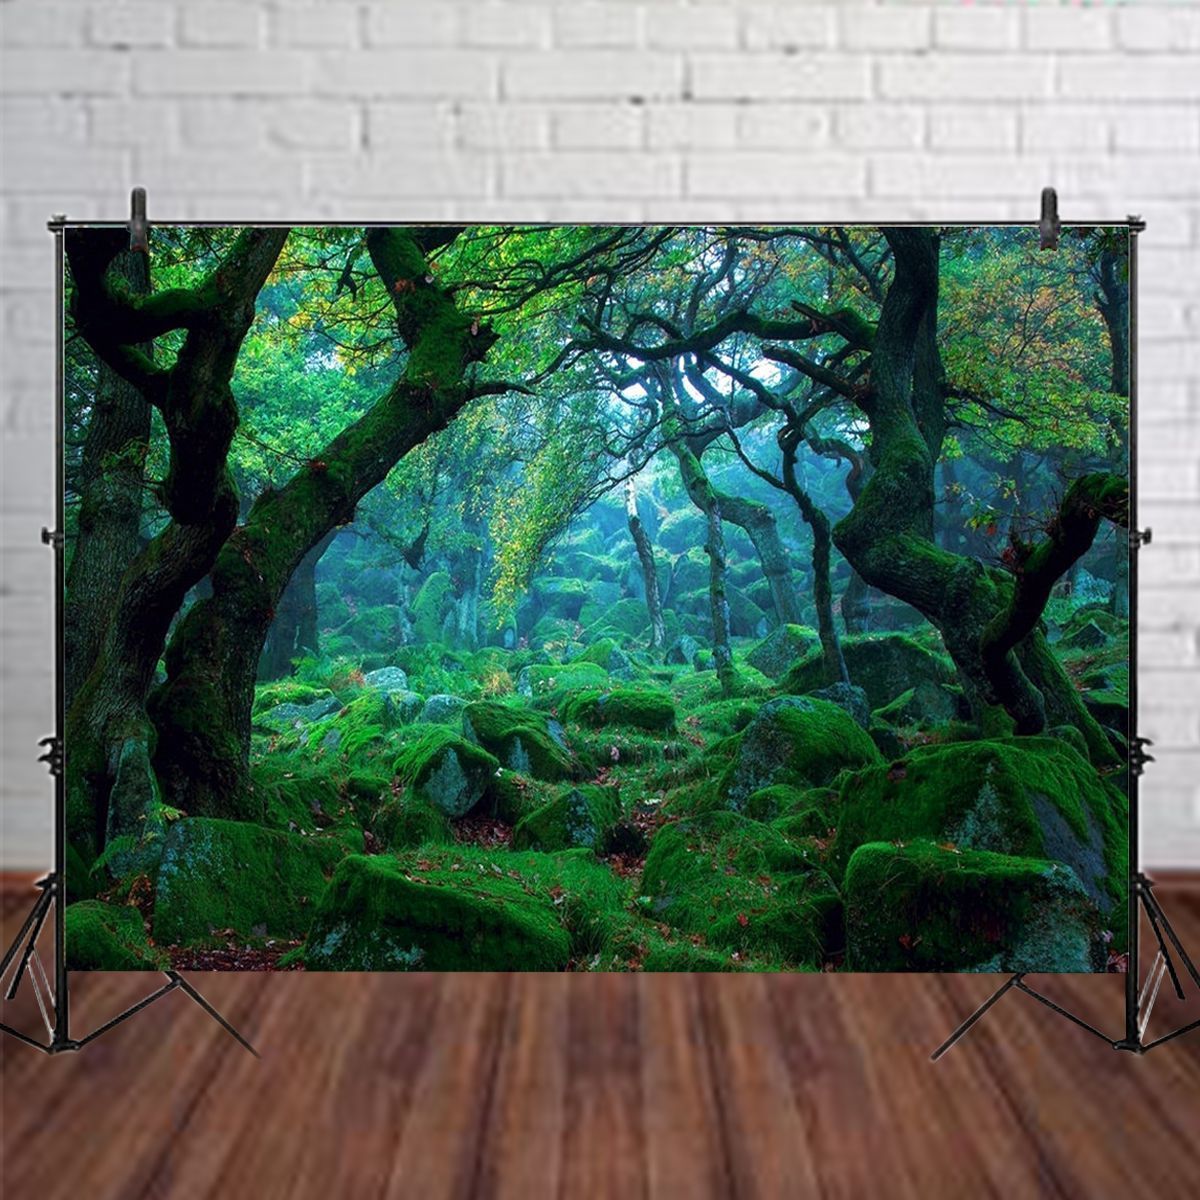 210x150cm-Natural-Forest-Jungle-Photography-Background-Studio-Backdrop-Photo-Props-Wall-Hanging-Tape-1717692